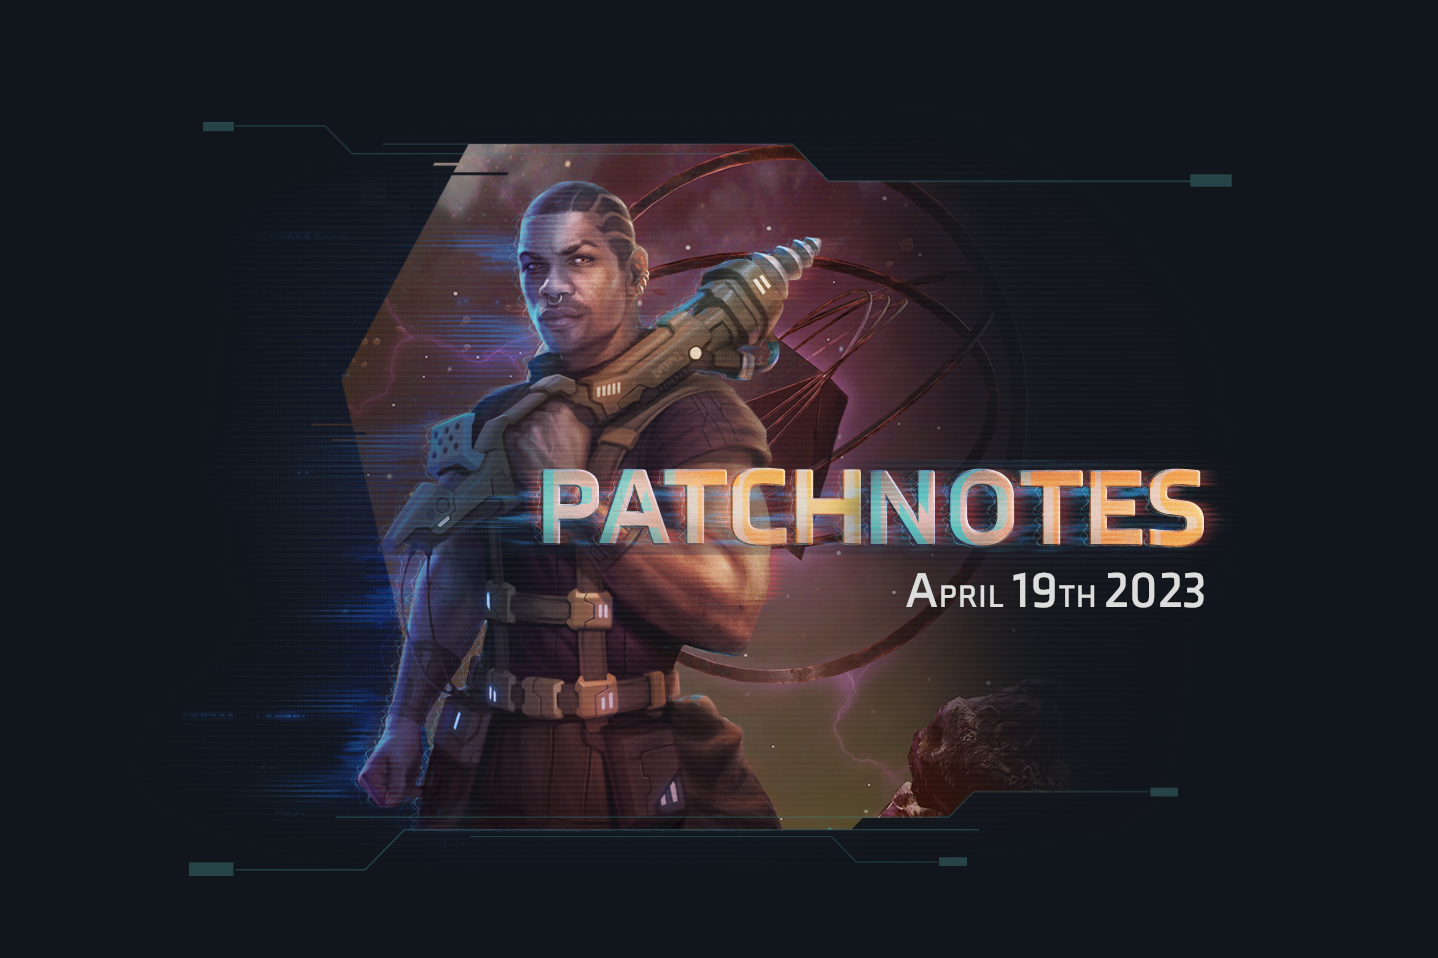 Starborne: Frontiers - Patch Notes April 19th 2023